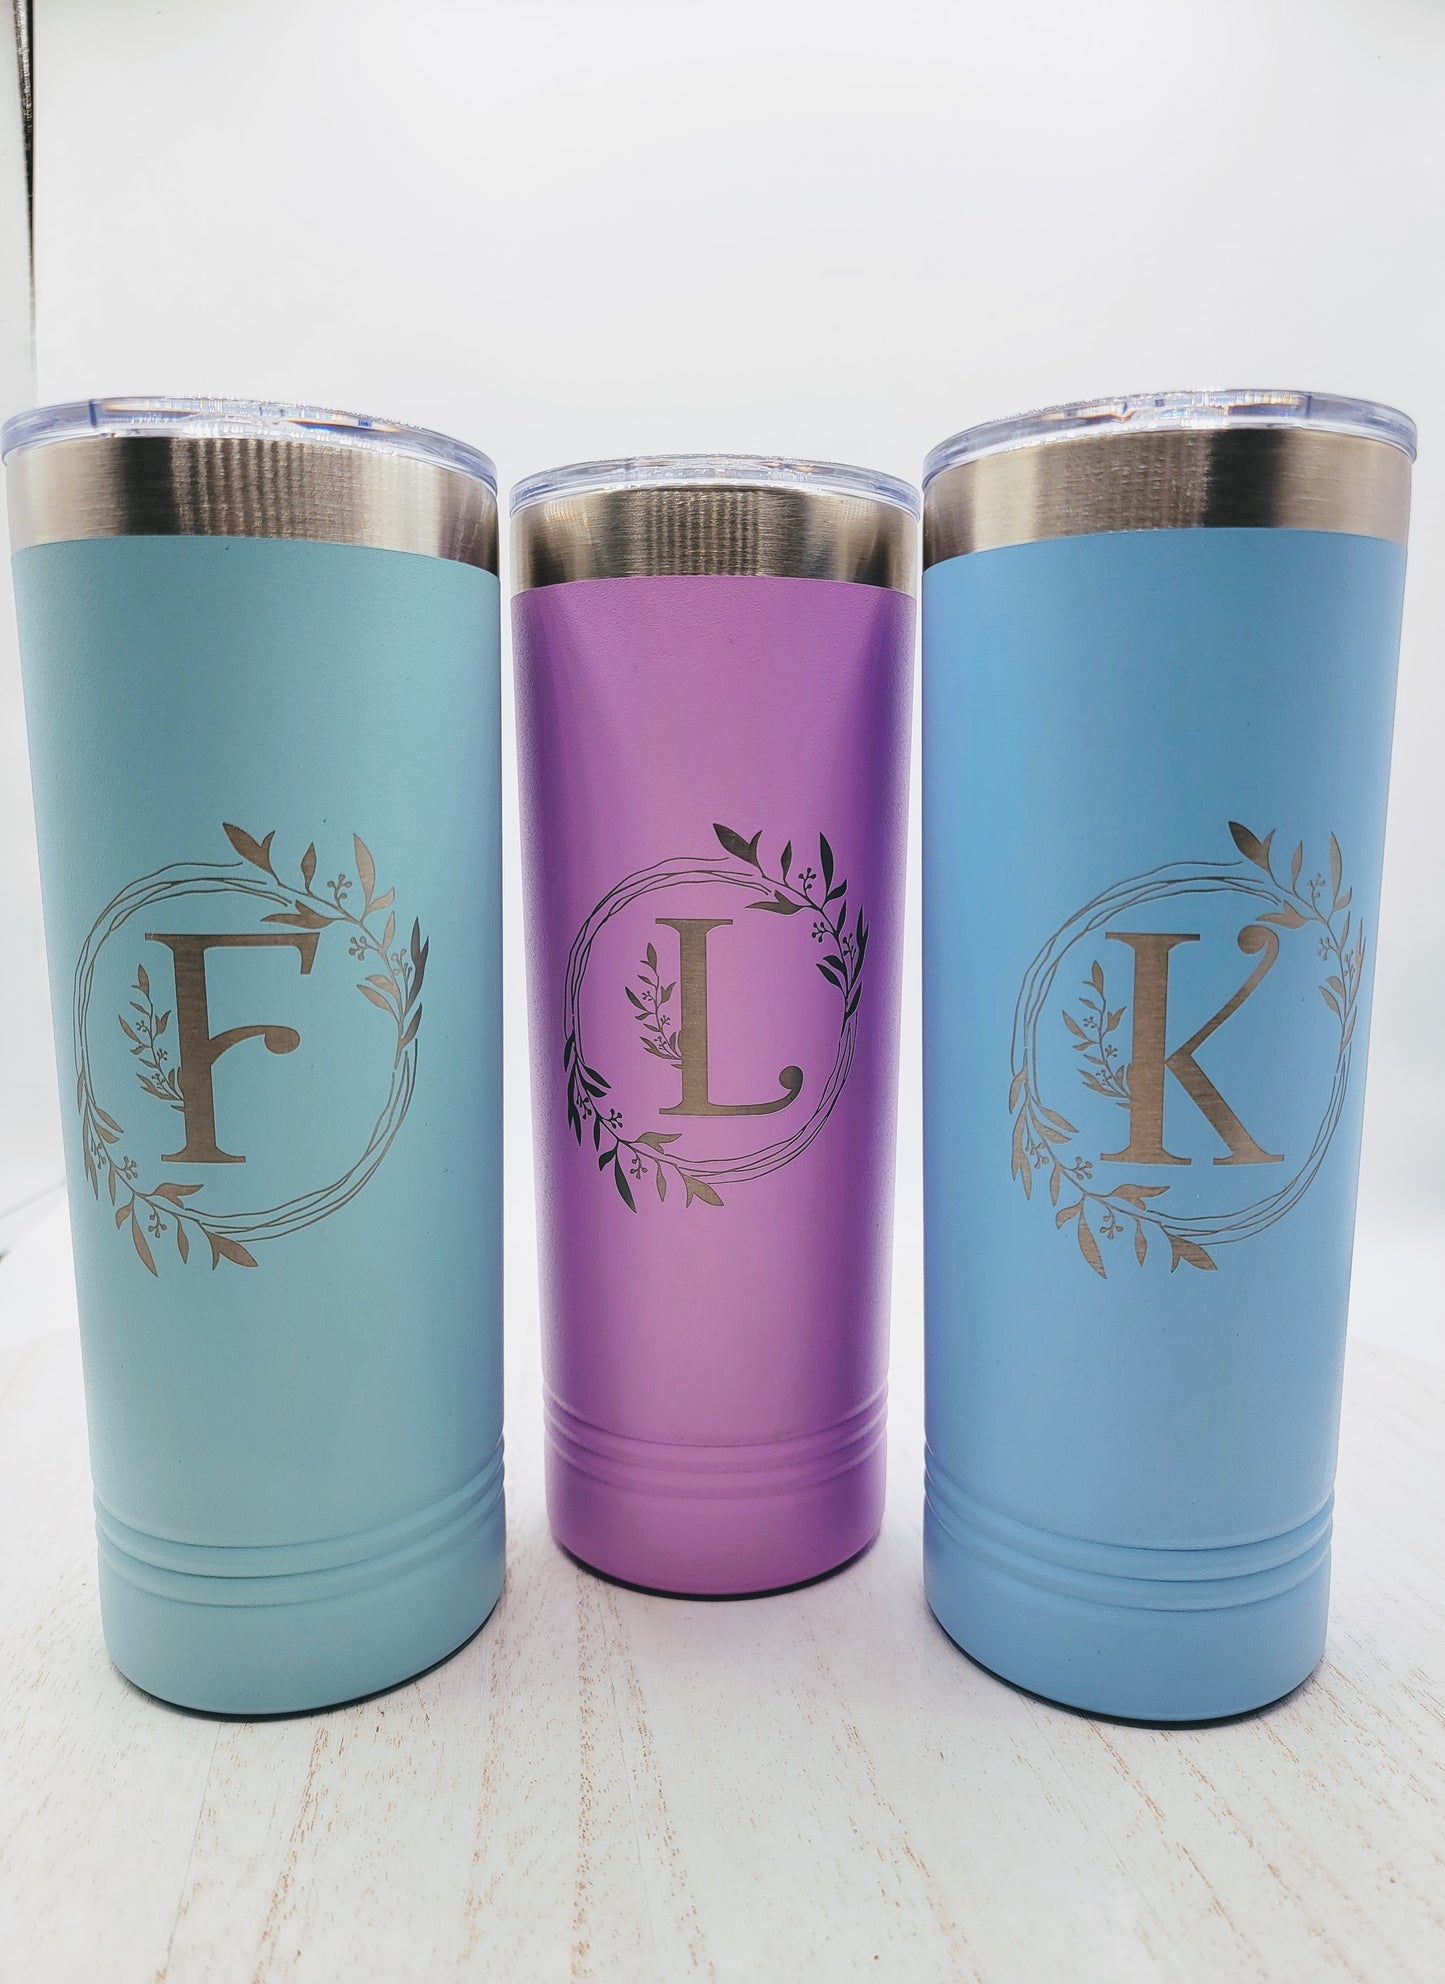 3 skinny tumblers in teal, light purple, and light blue on white background